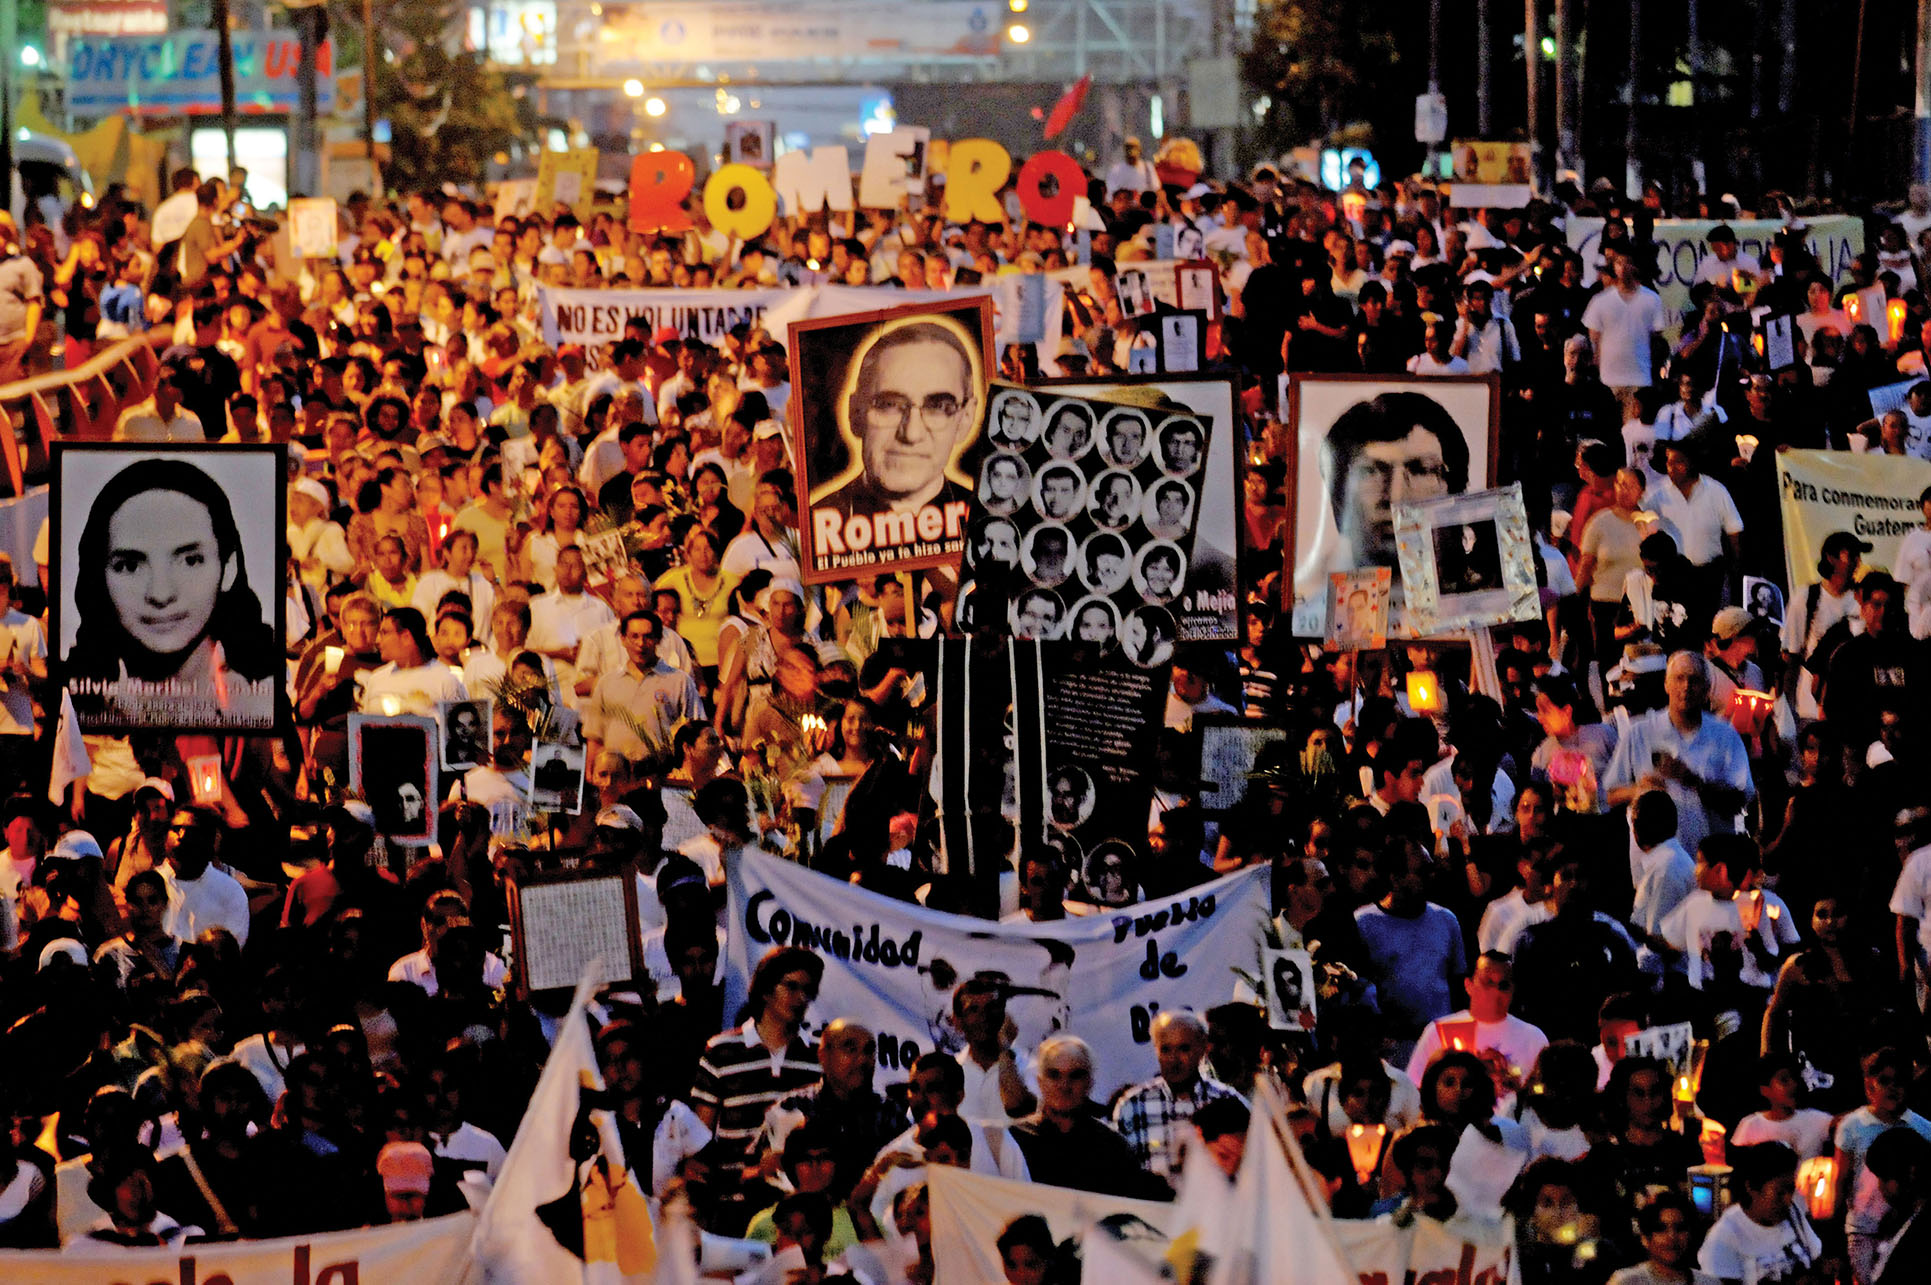 A huge 2010 San Salvador procession marks the 30th anniversary of Romero’s murder. (Photo by José Cabezas/AFP/Getty Images.)